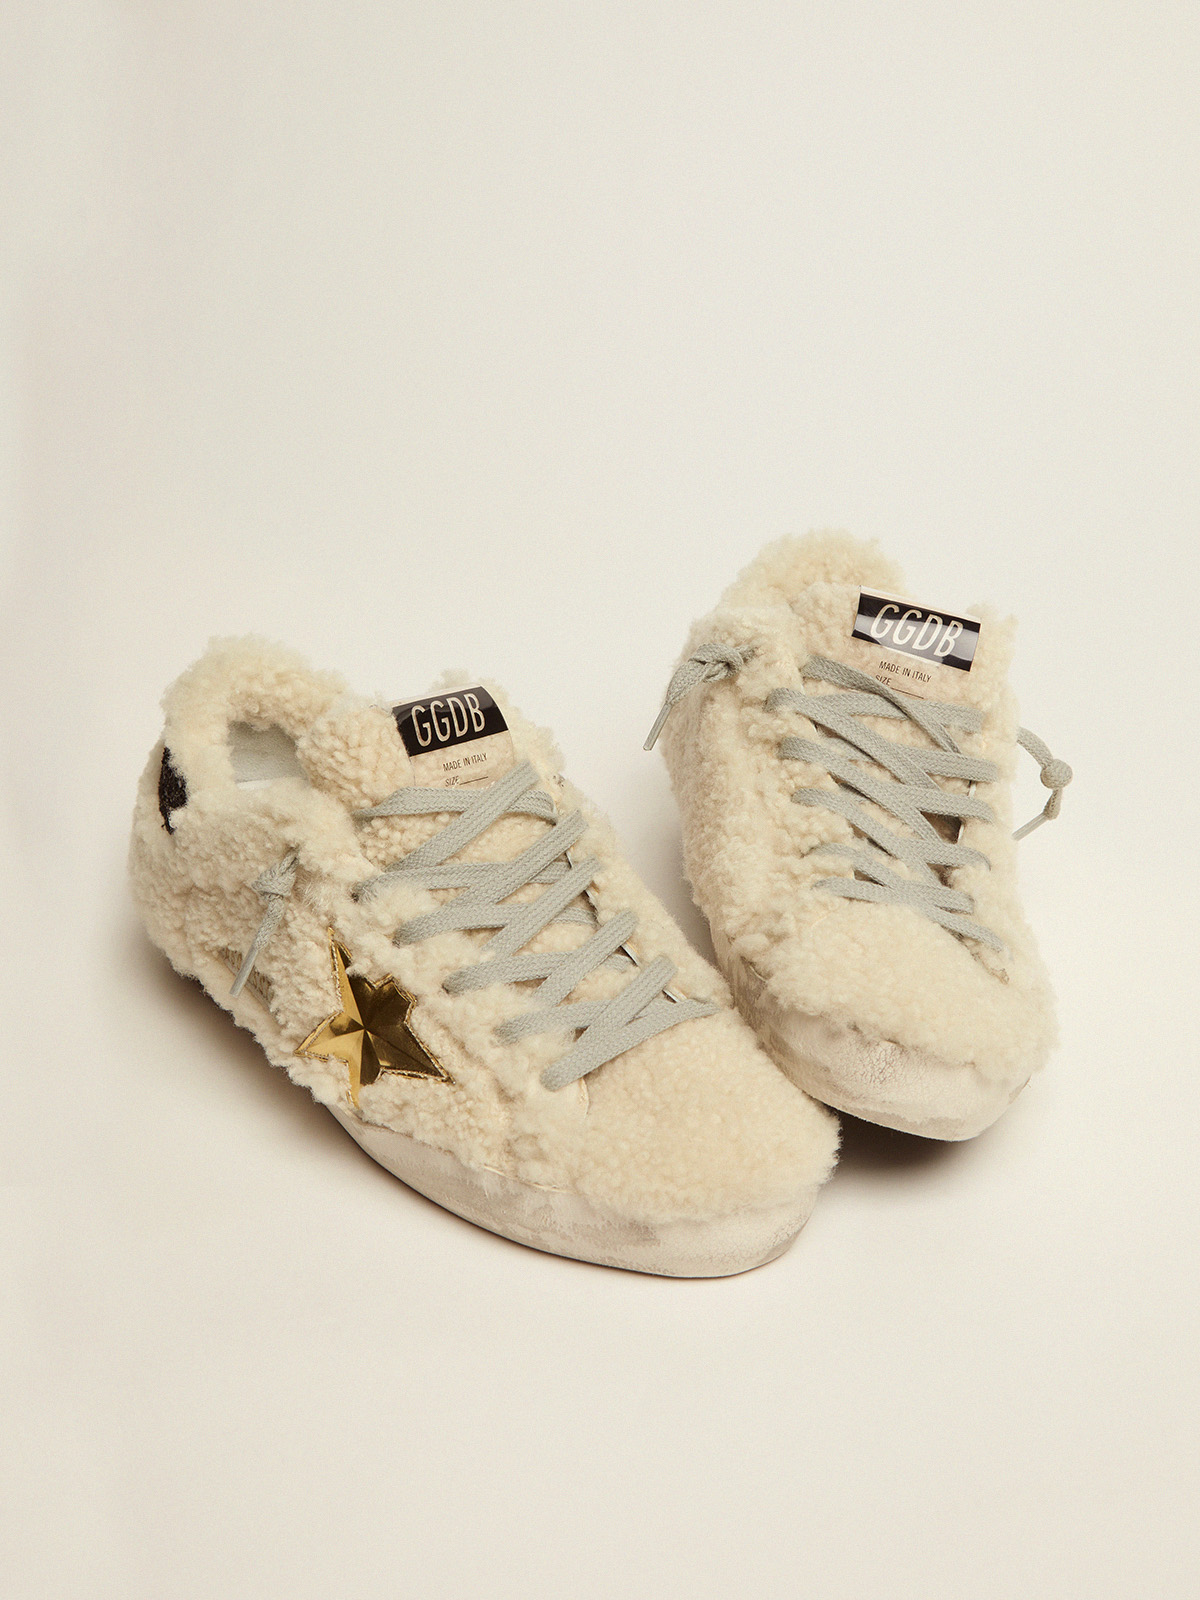 Super-Star sneakers in shearling with gold 3D star | Golden Goose